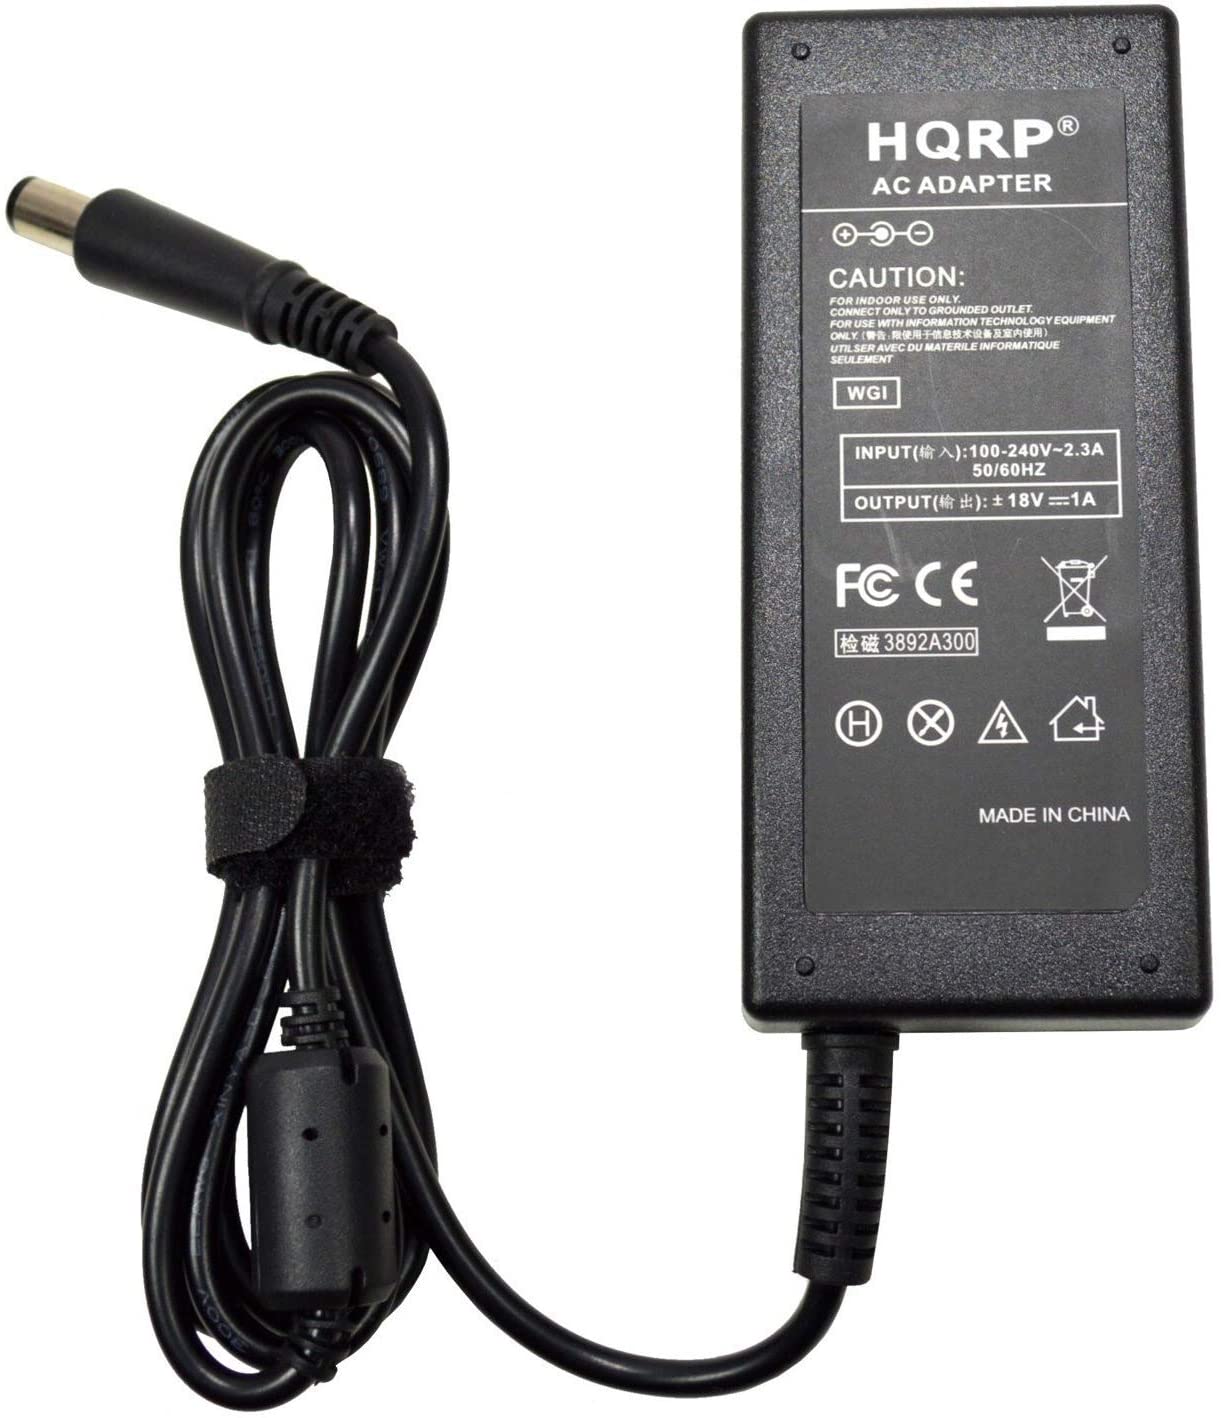 HQRP +/-18V AC Adapter for SoundDock Series 3 III 310583-1130 Digital Music System PCS36W-208 Wireless Speaker Power Supply Cord plus HQRP Euro Plug Adapter - image 3 of 8